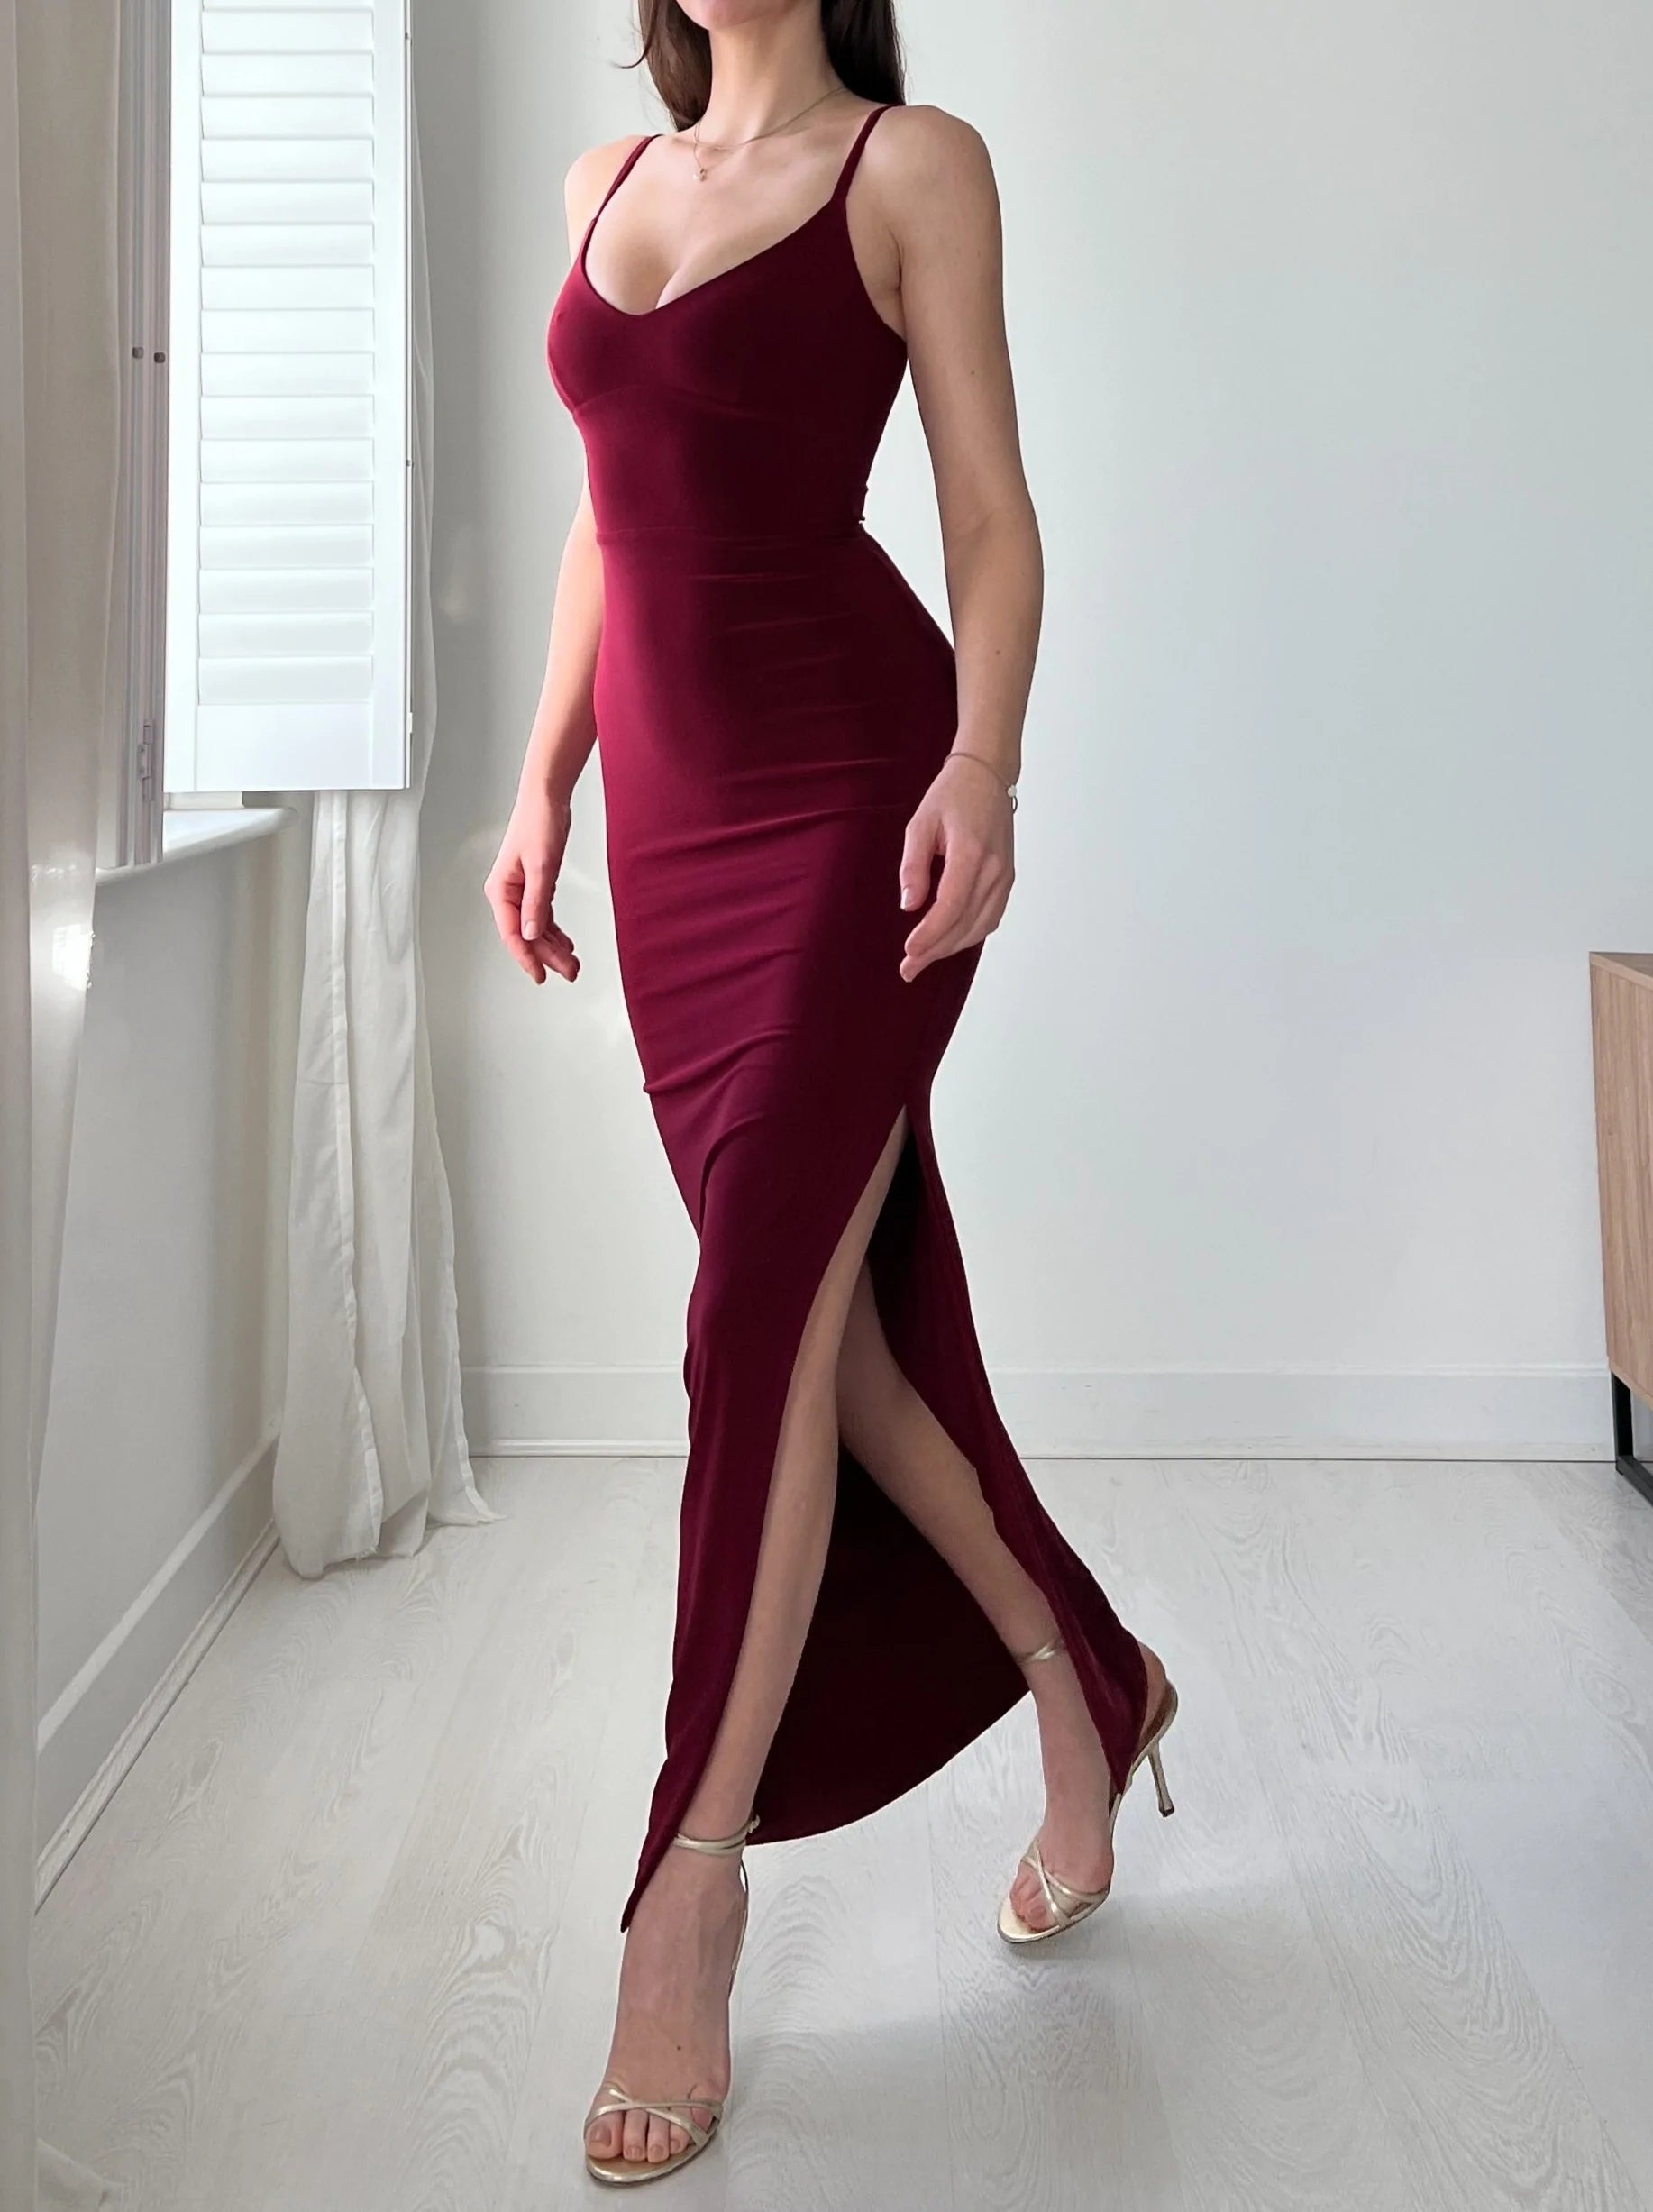 The 'Lulah' Maxi Dress is designed with a built in bra. Its made